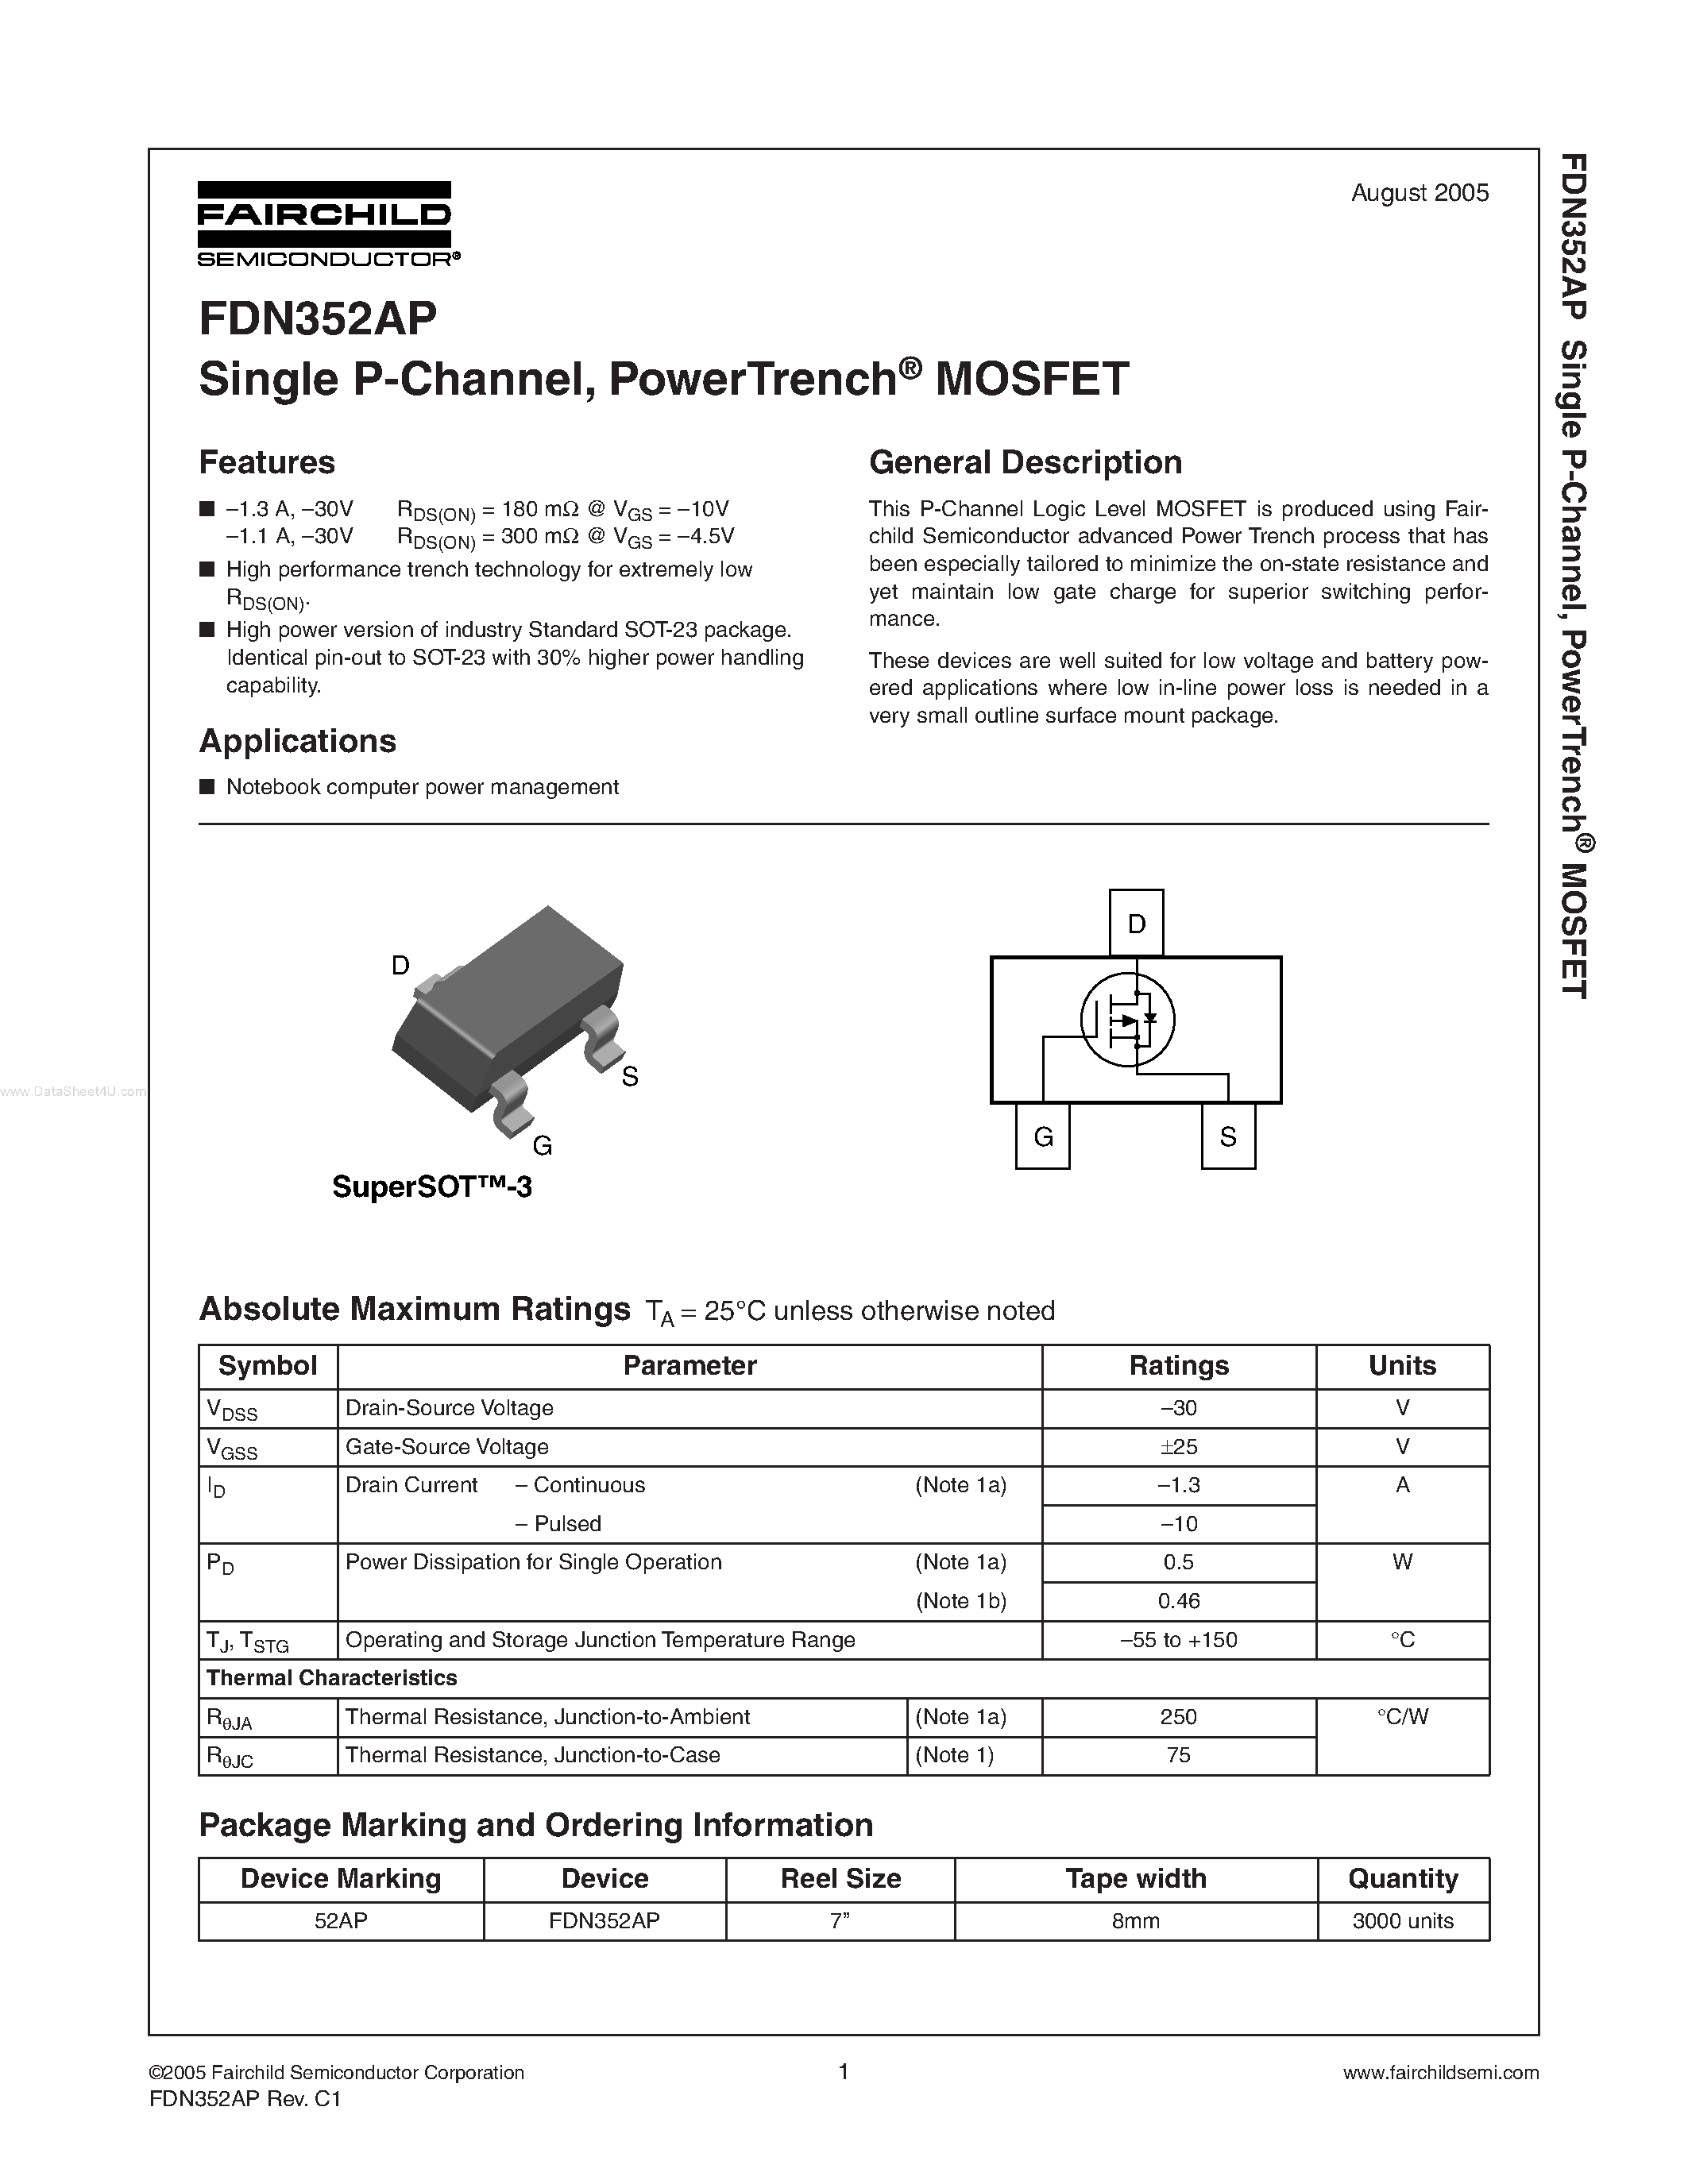 Даташит FDN352AP - PowerTrench MOSFET страница 1